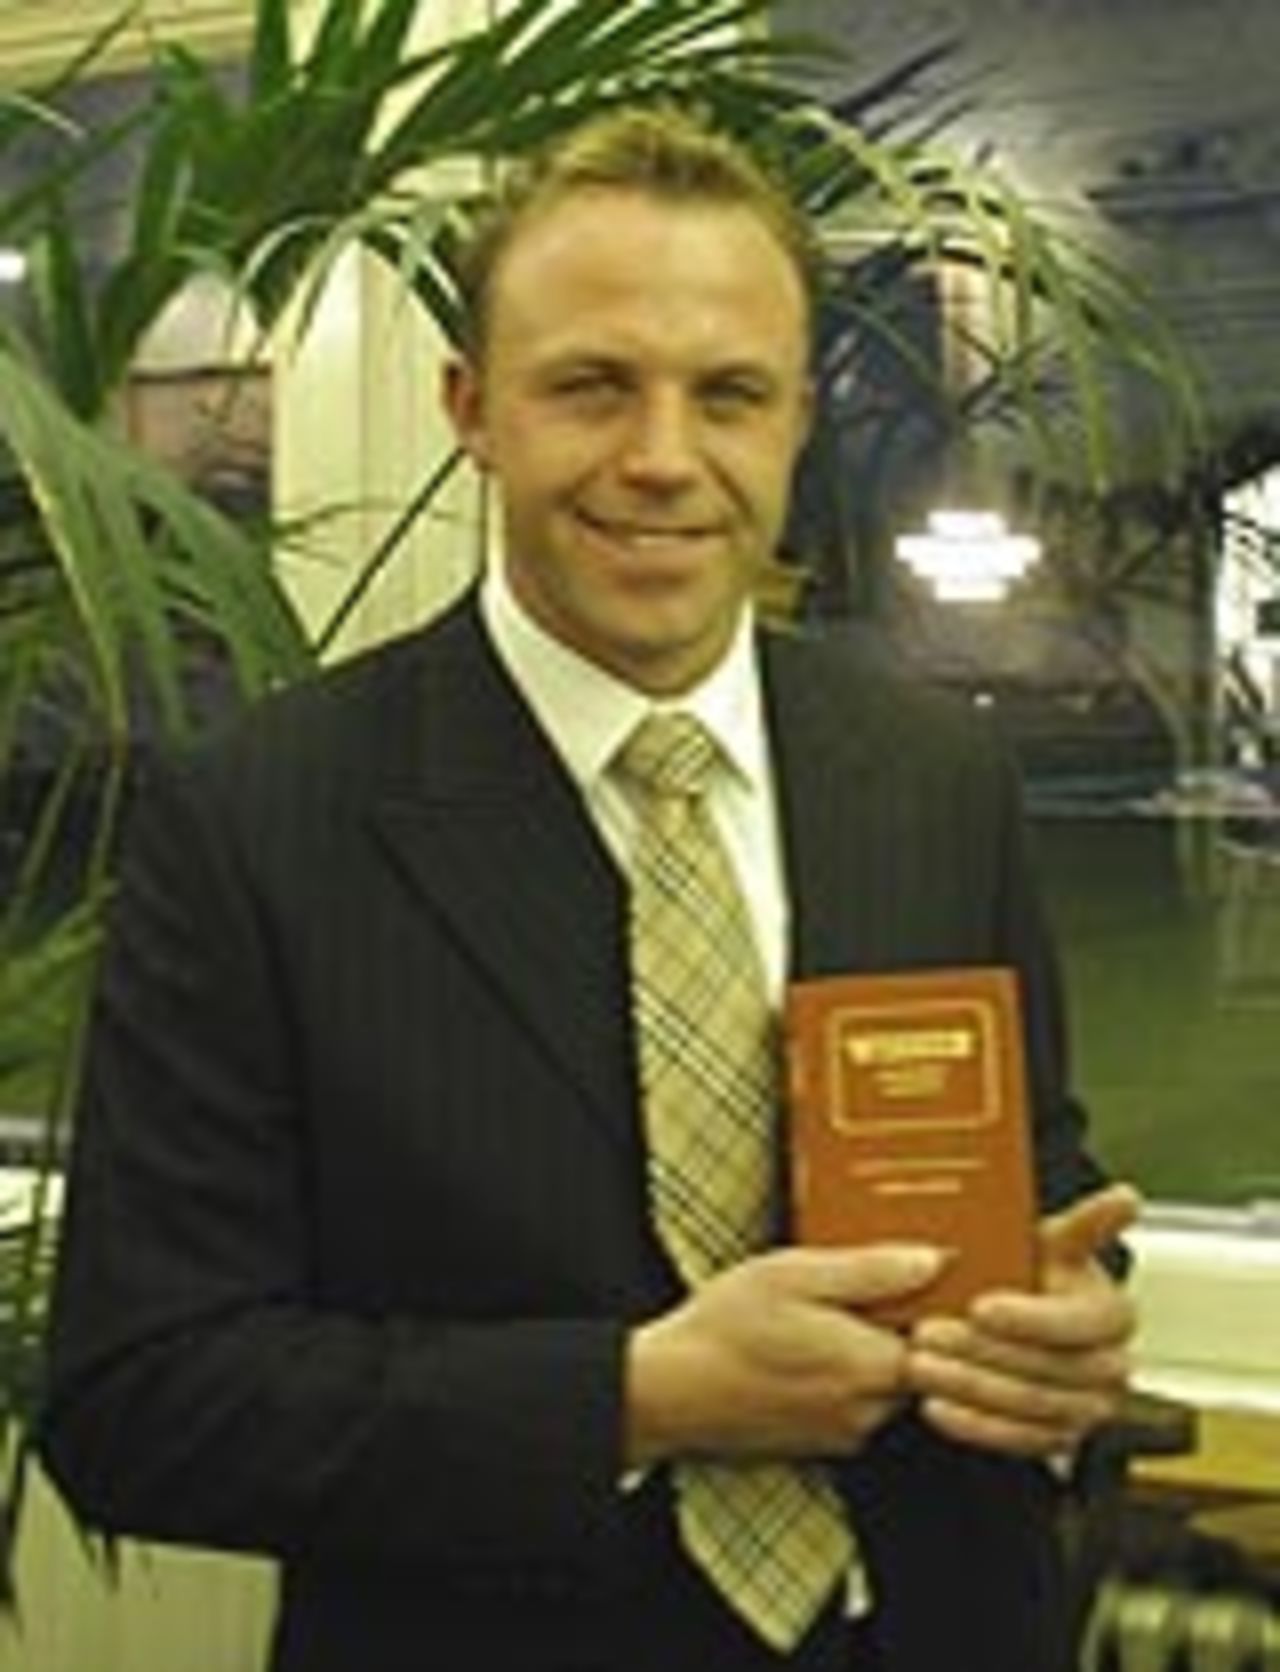 Chris Adams receives his leather-bound almanack as one of Wisden's Five Cricketers of the Year, April 7, 2004